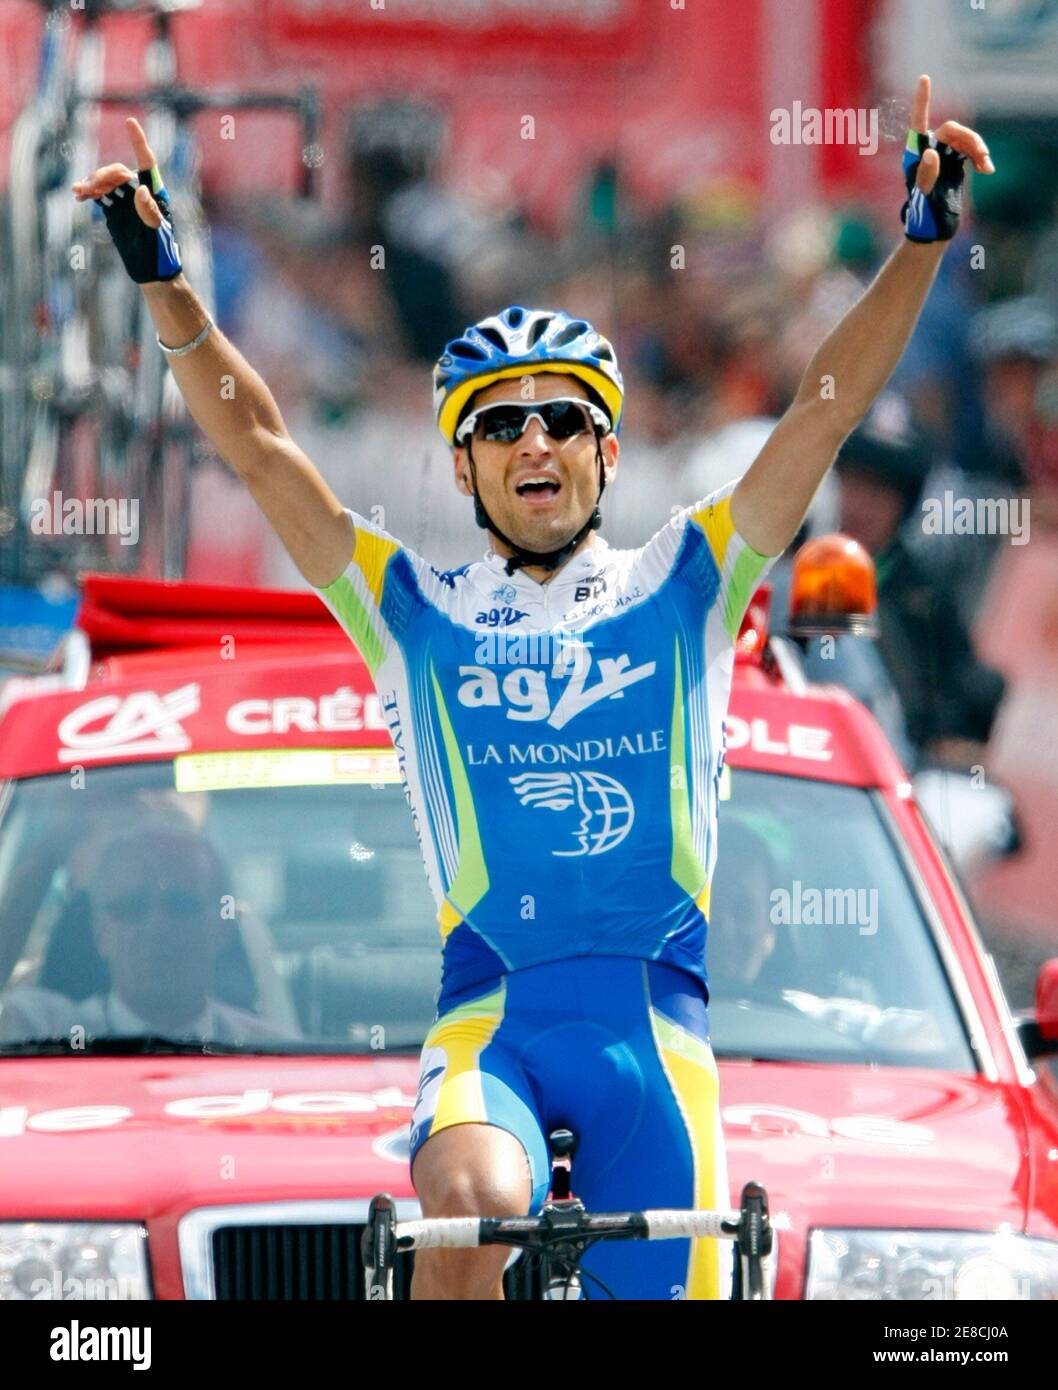 Cyril Dessel of France celebrates winning the fourth stage of the Dauphine cycling race between Vienne and Annemasse, in Annemasse, French Alps June 12, 2008.    REUTERS/Robert Pratta (FRANCE) Stock Photo